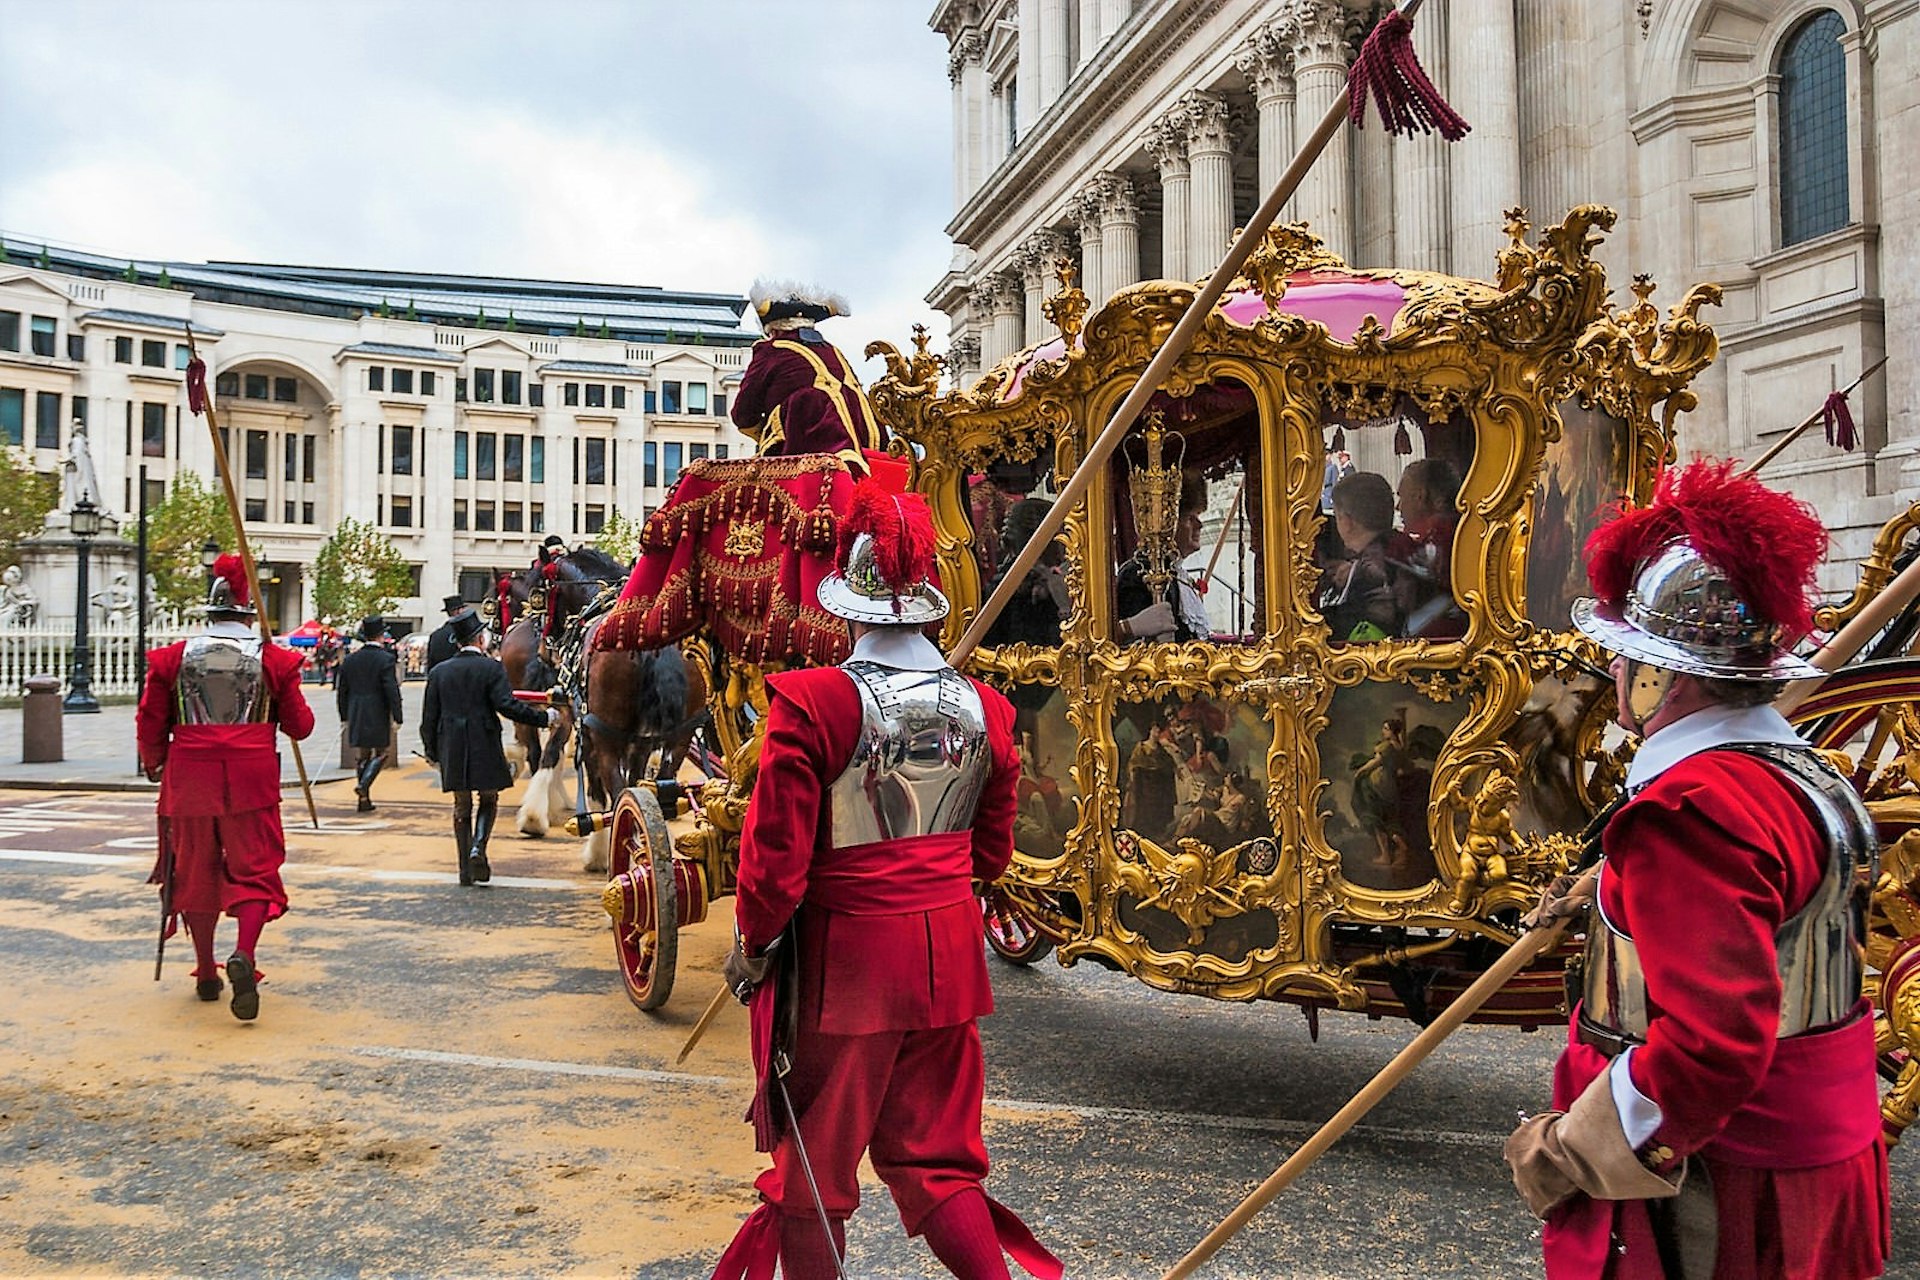 Each year, the new Lord Mayor parades through the streets of The City in their gilded coach © Michael Godek / Getty Images